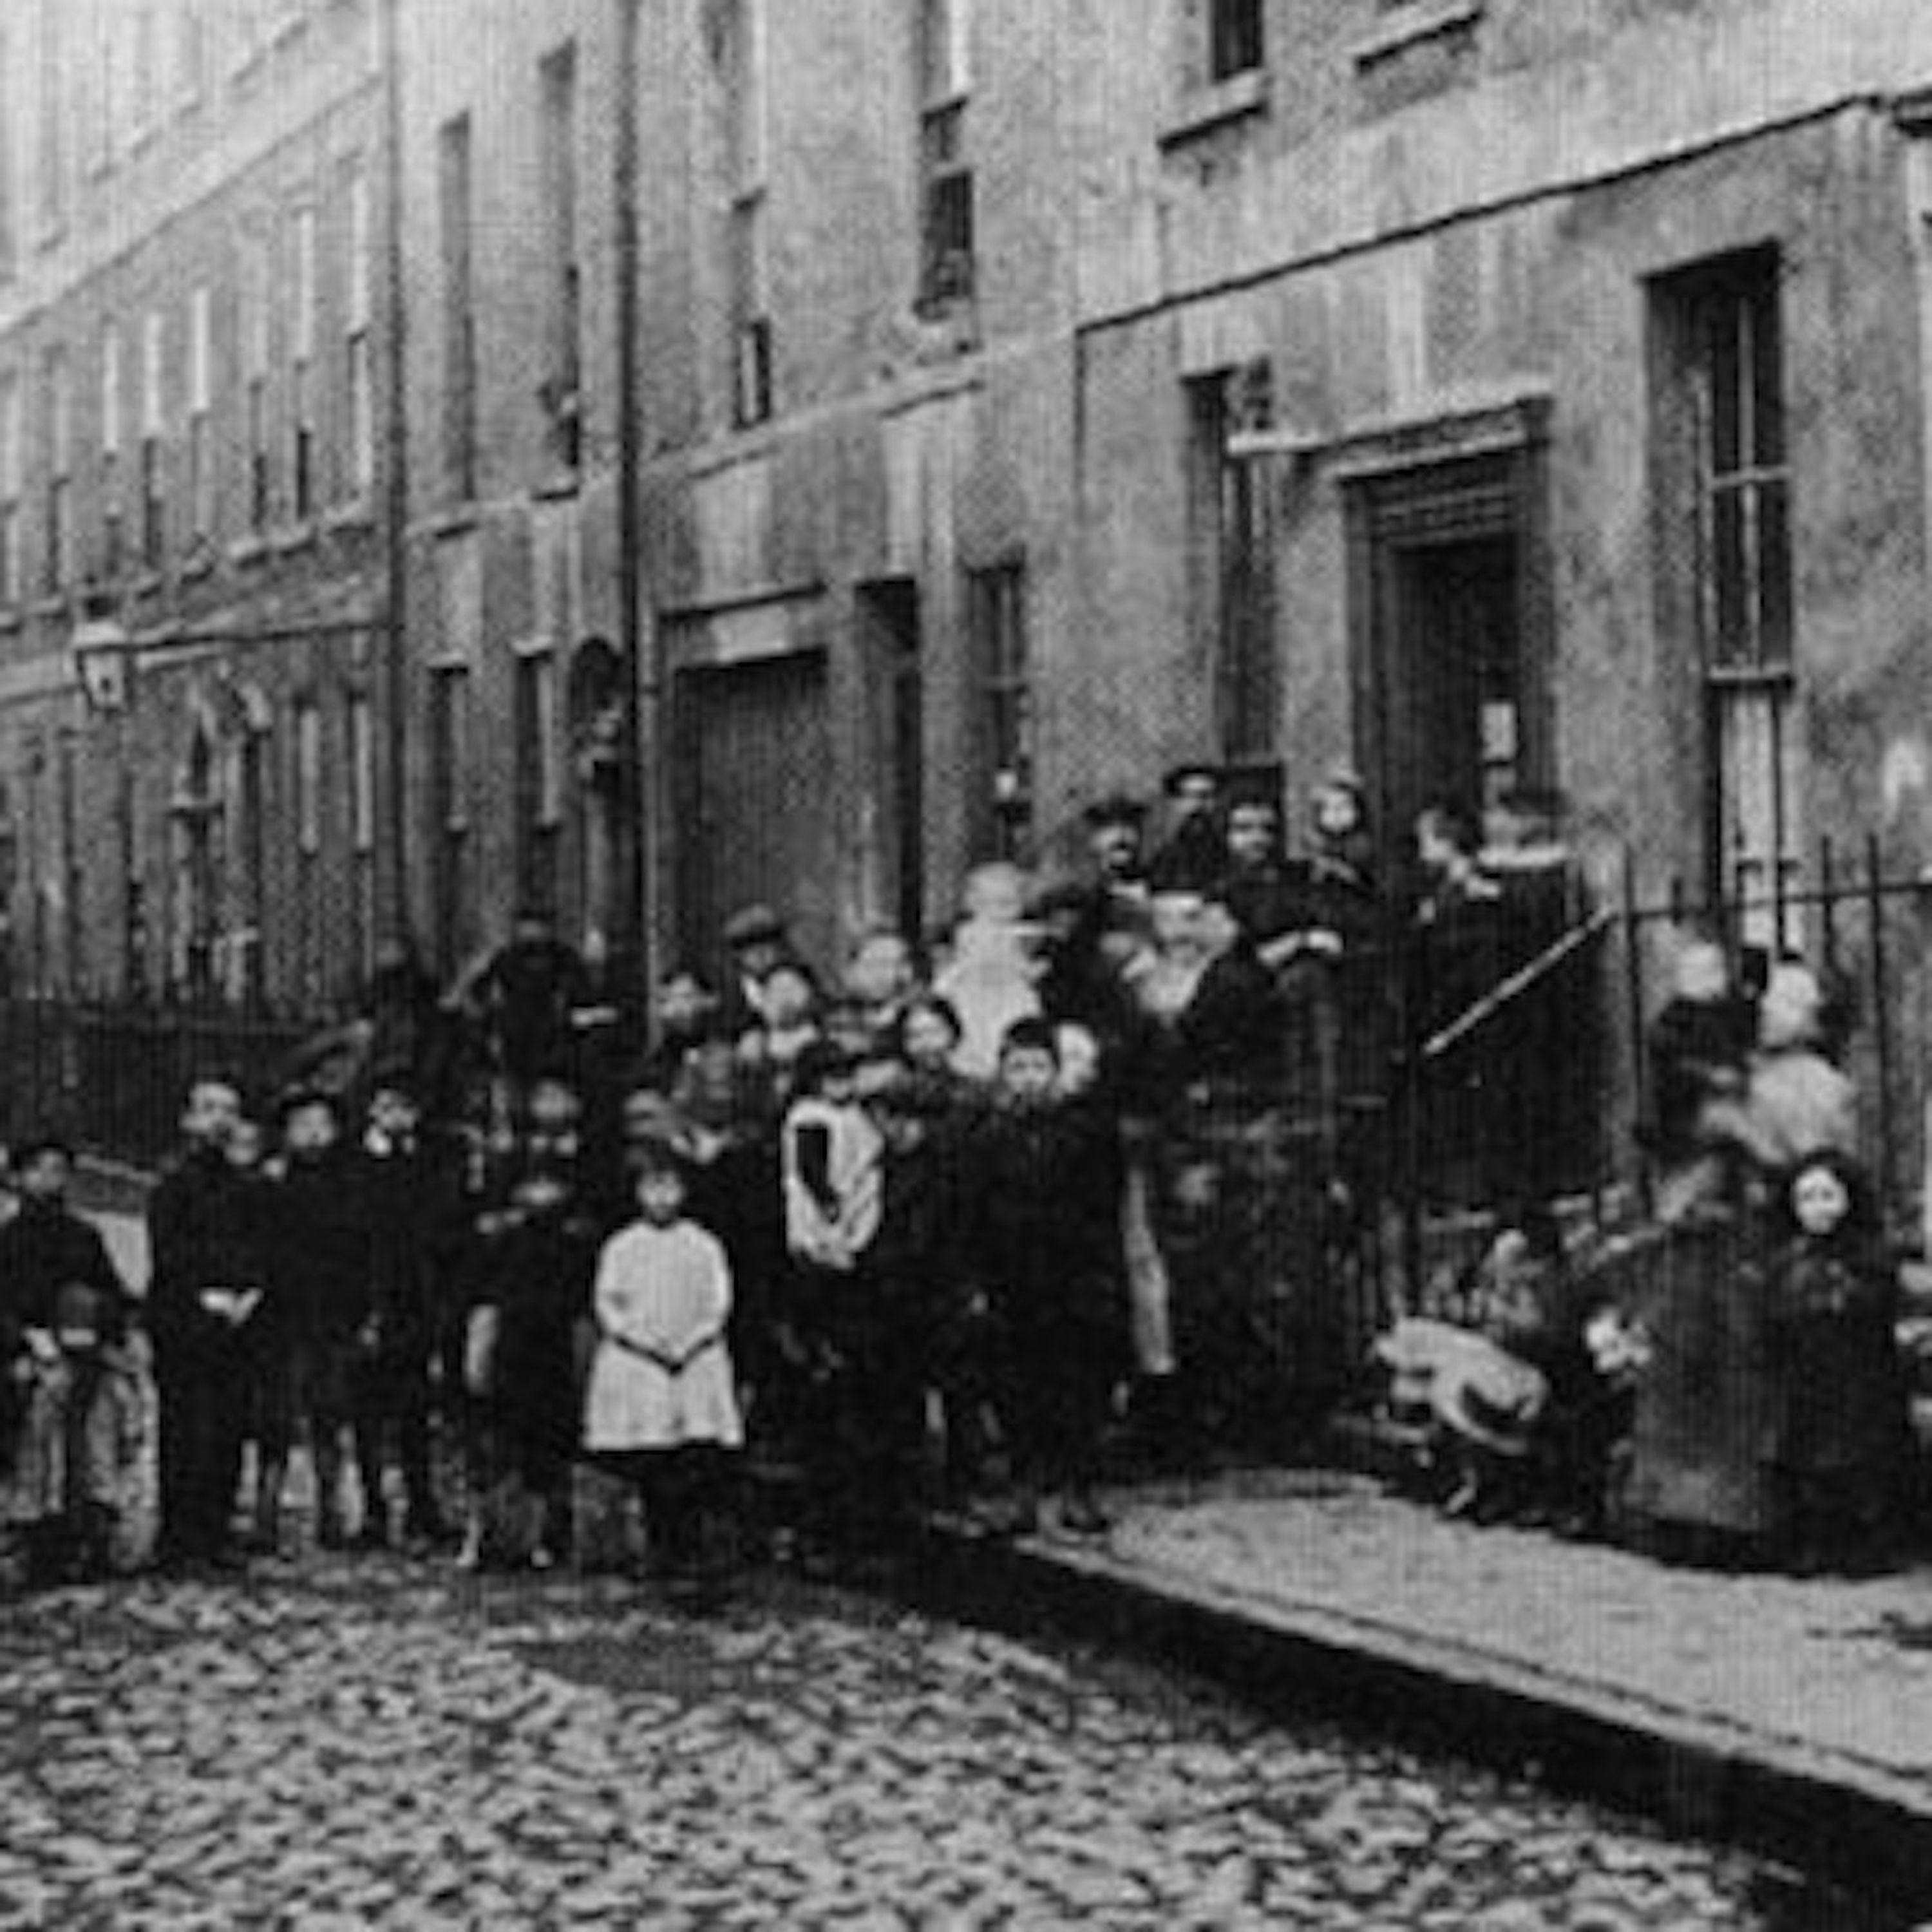 Dublin 1916: The Calm Before the Storm